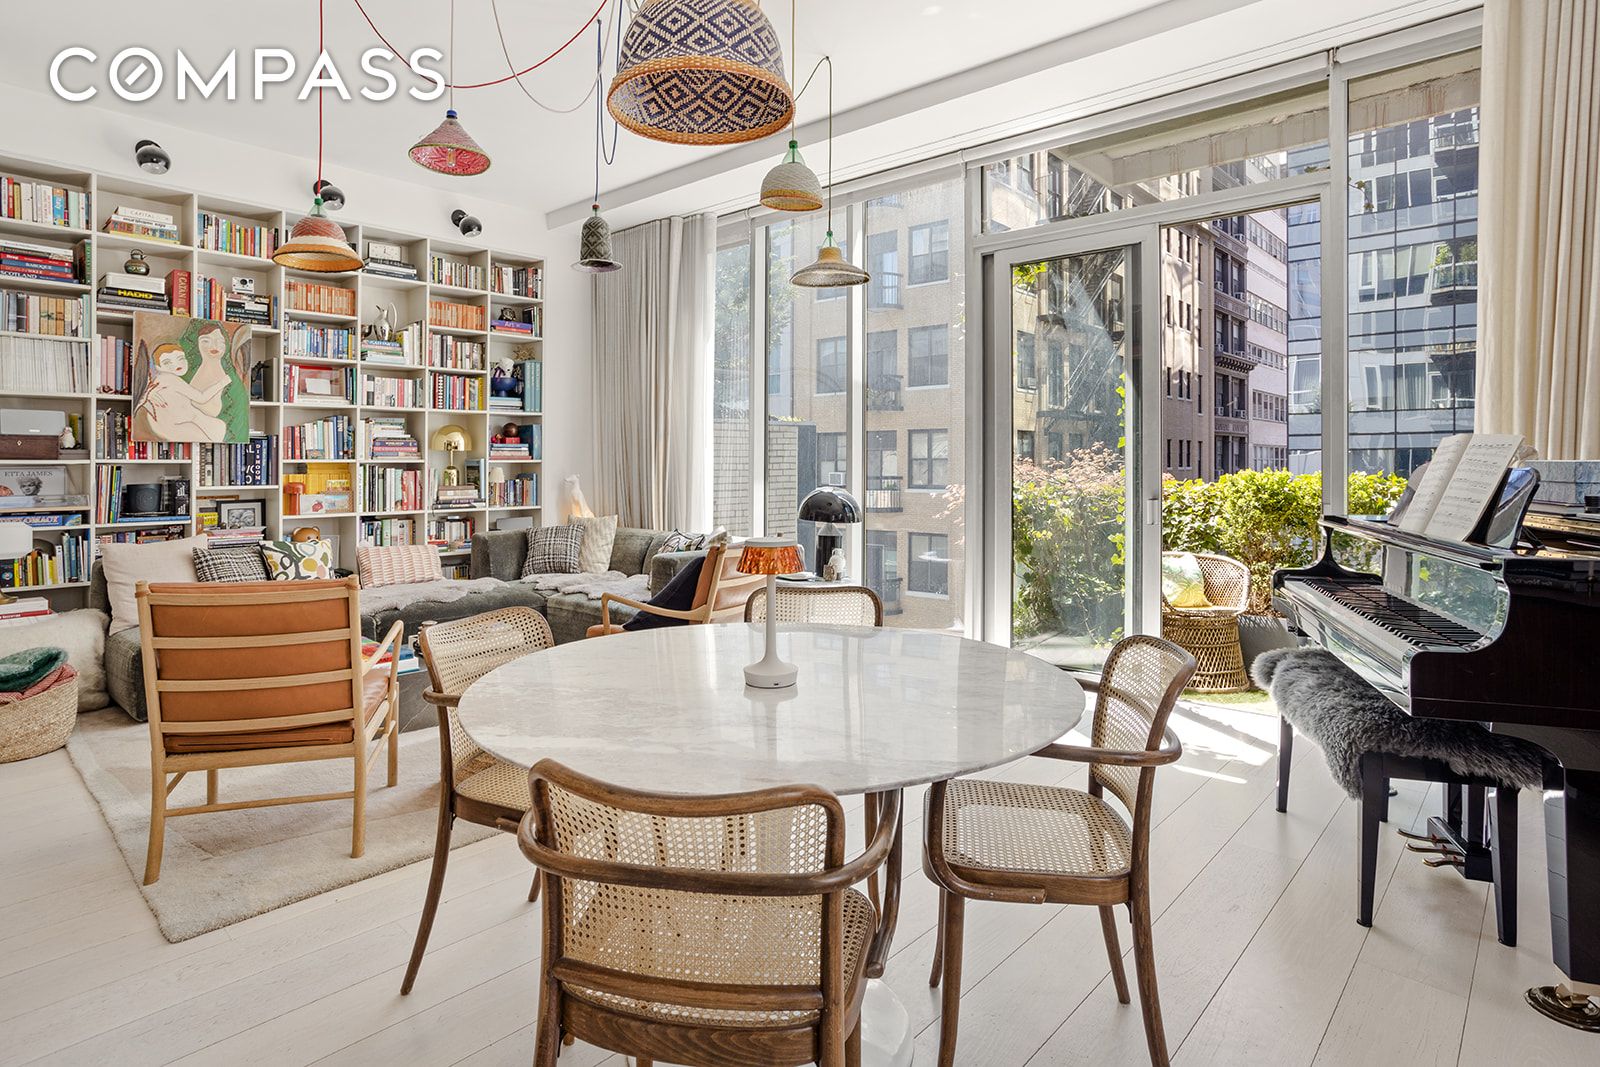 119 Fulton Street 9, Financial District, Downtown, NYC - 2 Bedrooms  
2 Bathrooms  
4 Rooms - 